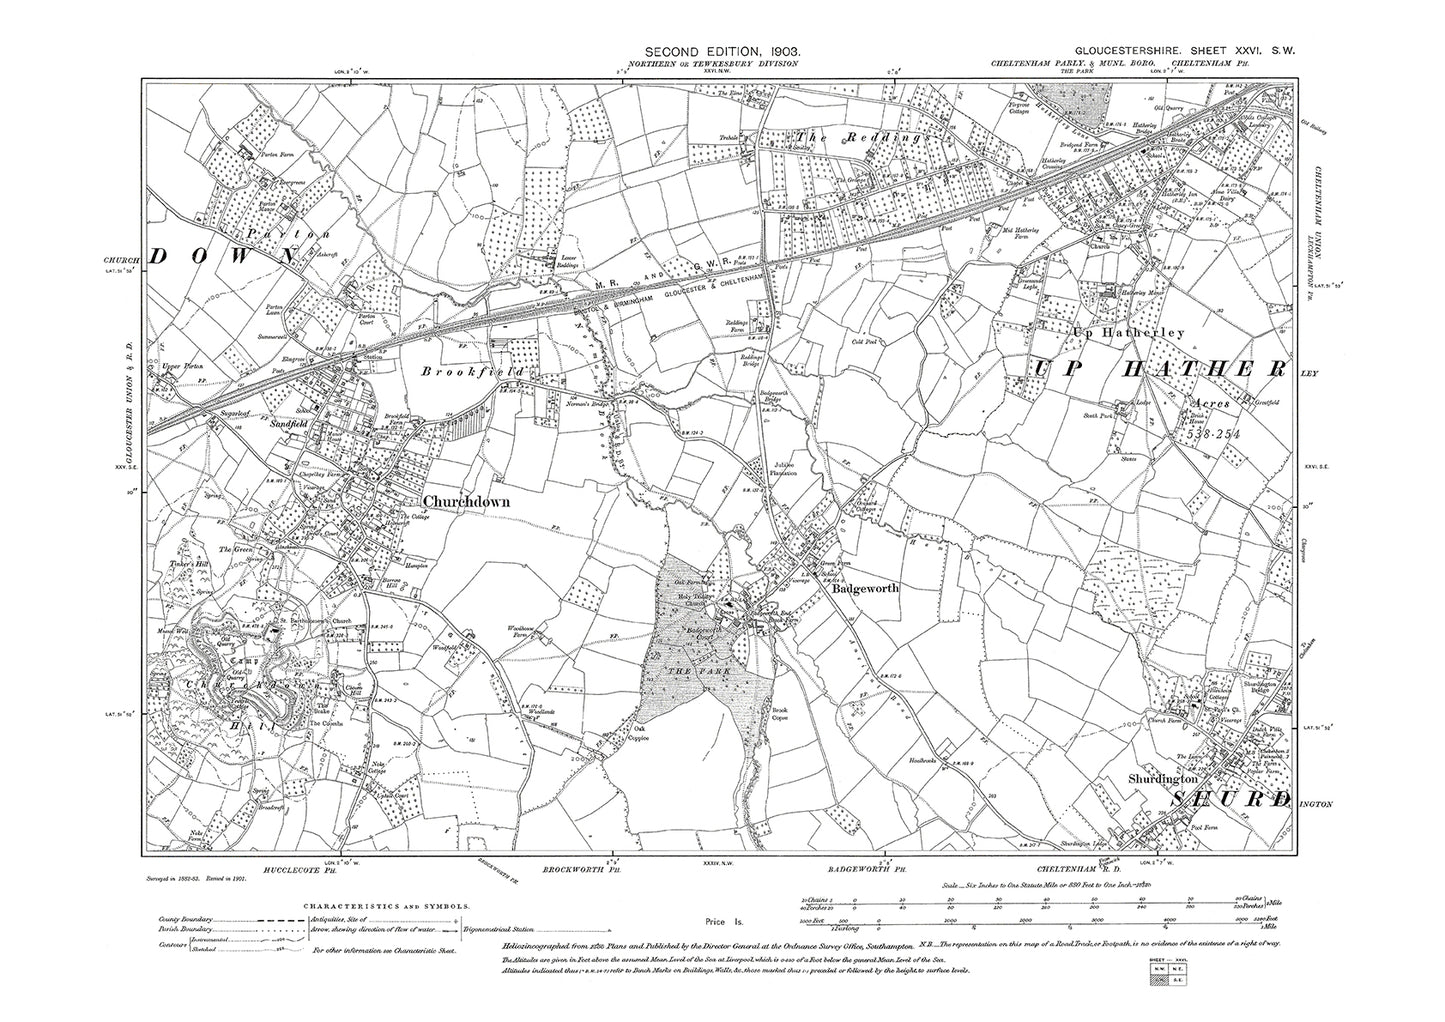 Old OS map dated 1903, showing Up Hatherley, Badgeworth, Churchdown, Shurdlington in Gloucestershire - 26SW